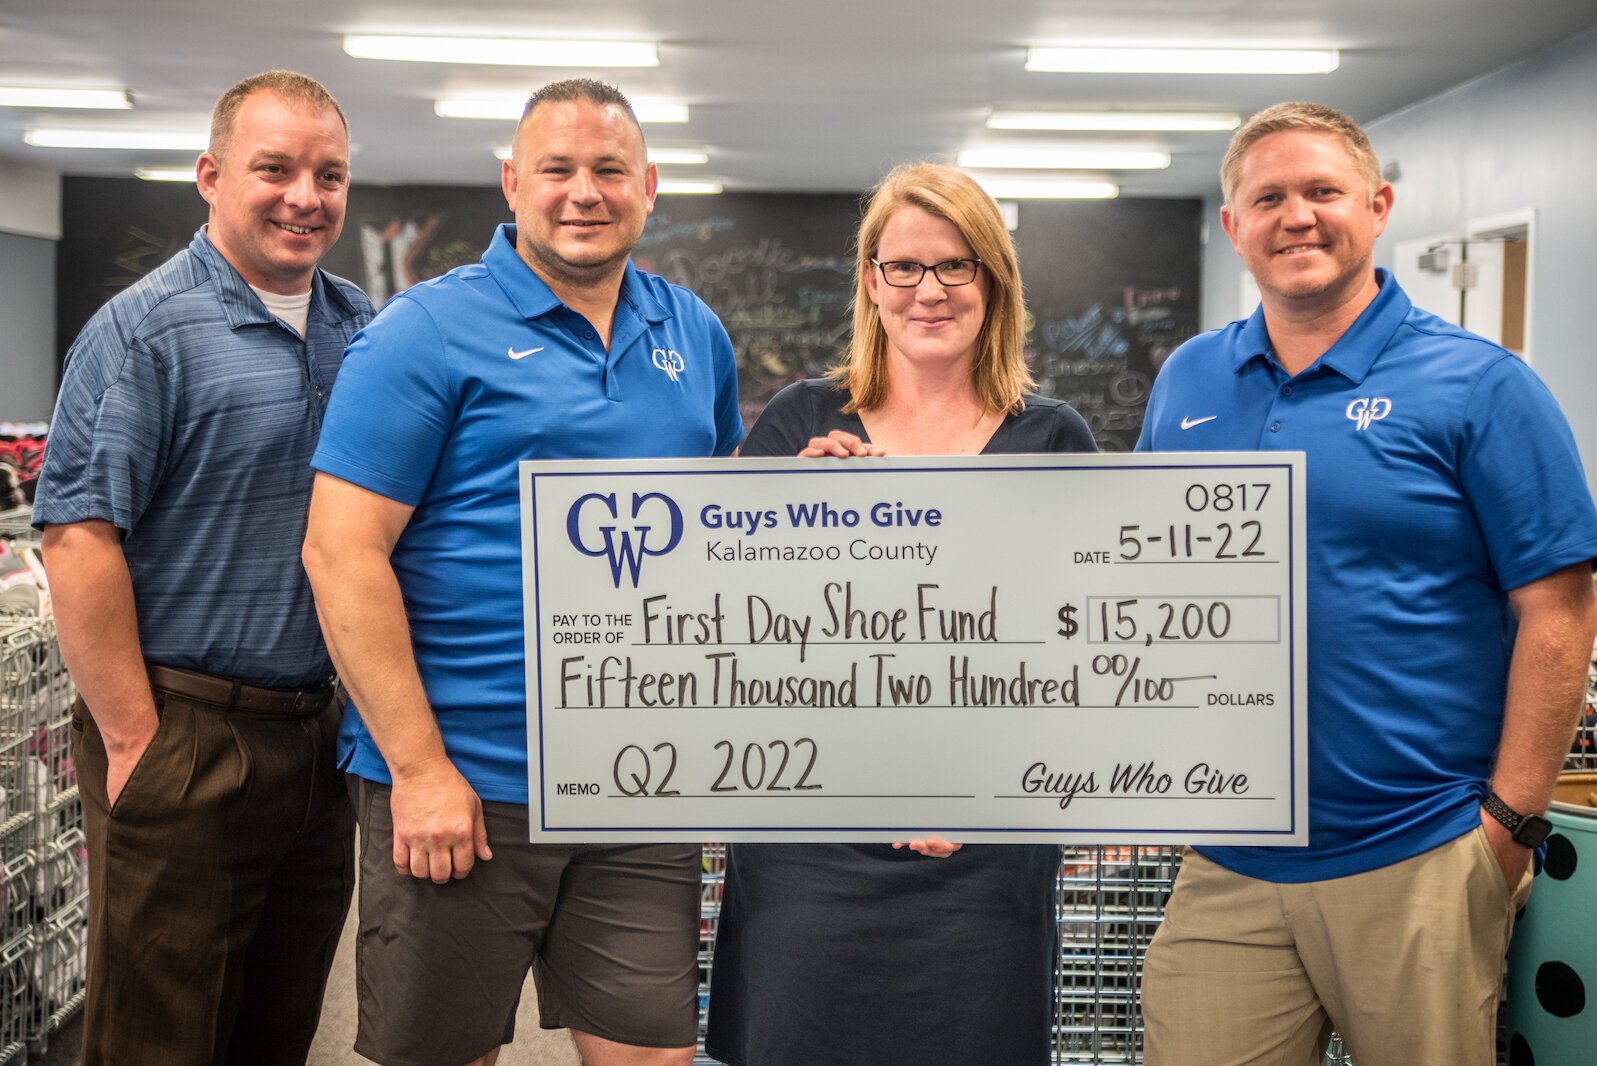 Maggie Hesketh, executive director of First Day Shoe Fund,  receives a major gift on Wednesday, June 22, 2022, from members of Guys Who Give. From left, they are Tim Evans, Don Solesbee, and Cody Livingston.